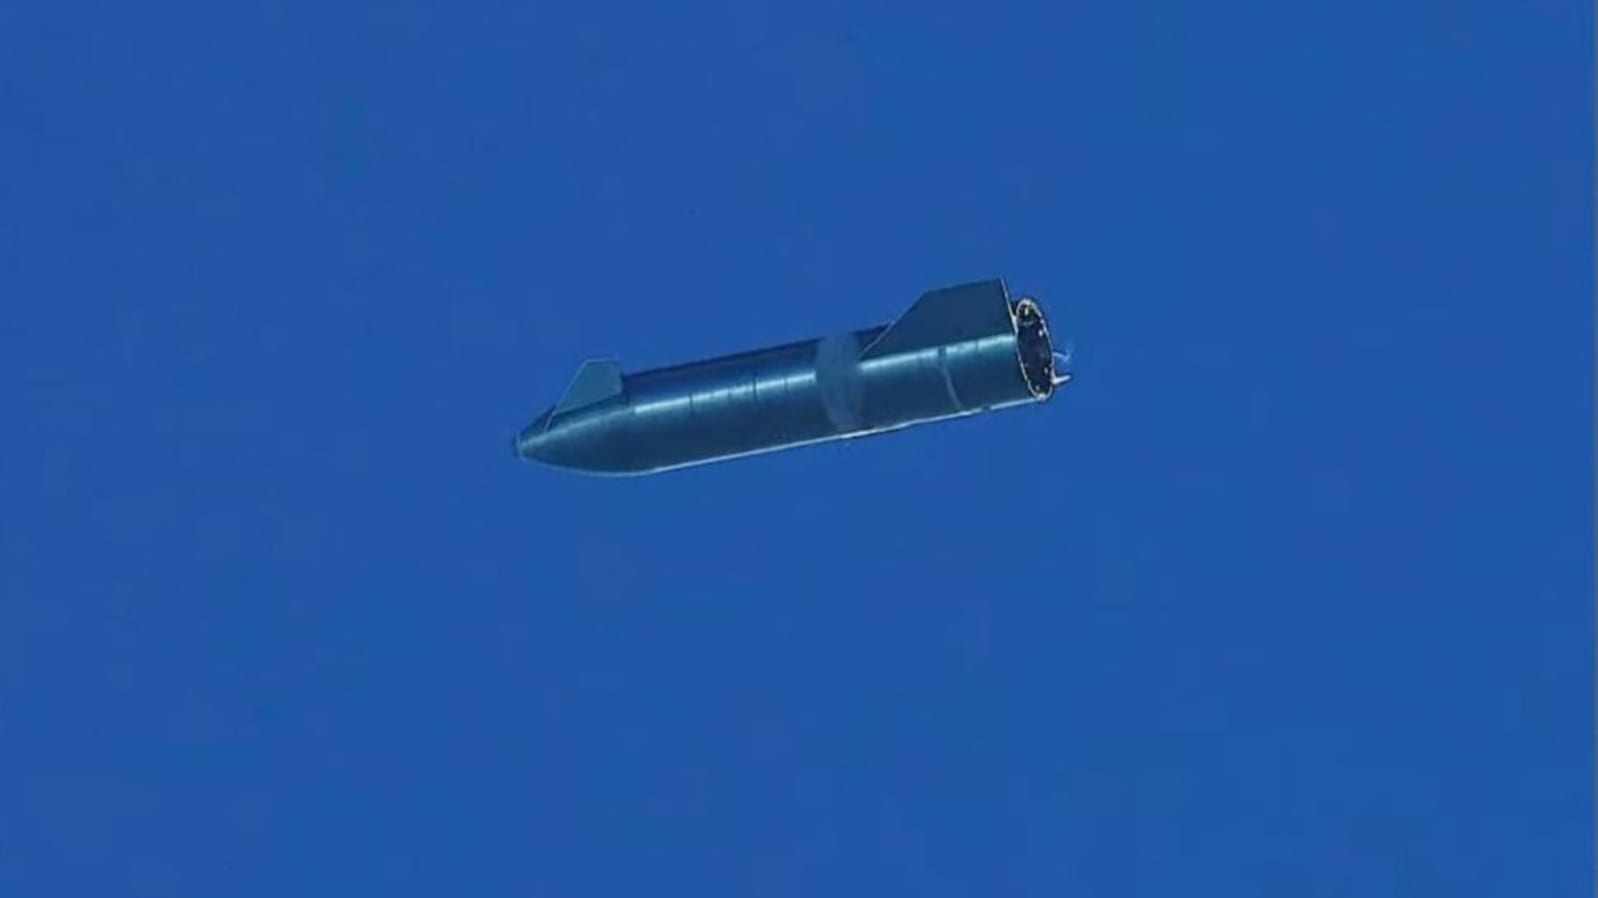 Starship prototype during free fall, in a test completed on December 9, 2020. (Image: SpaceX)